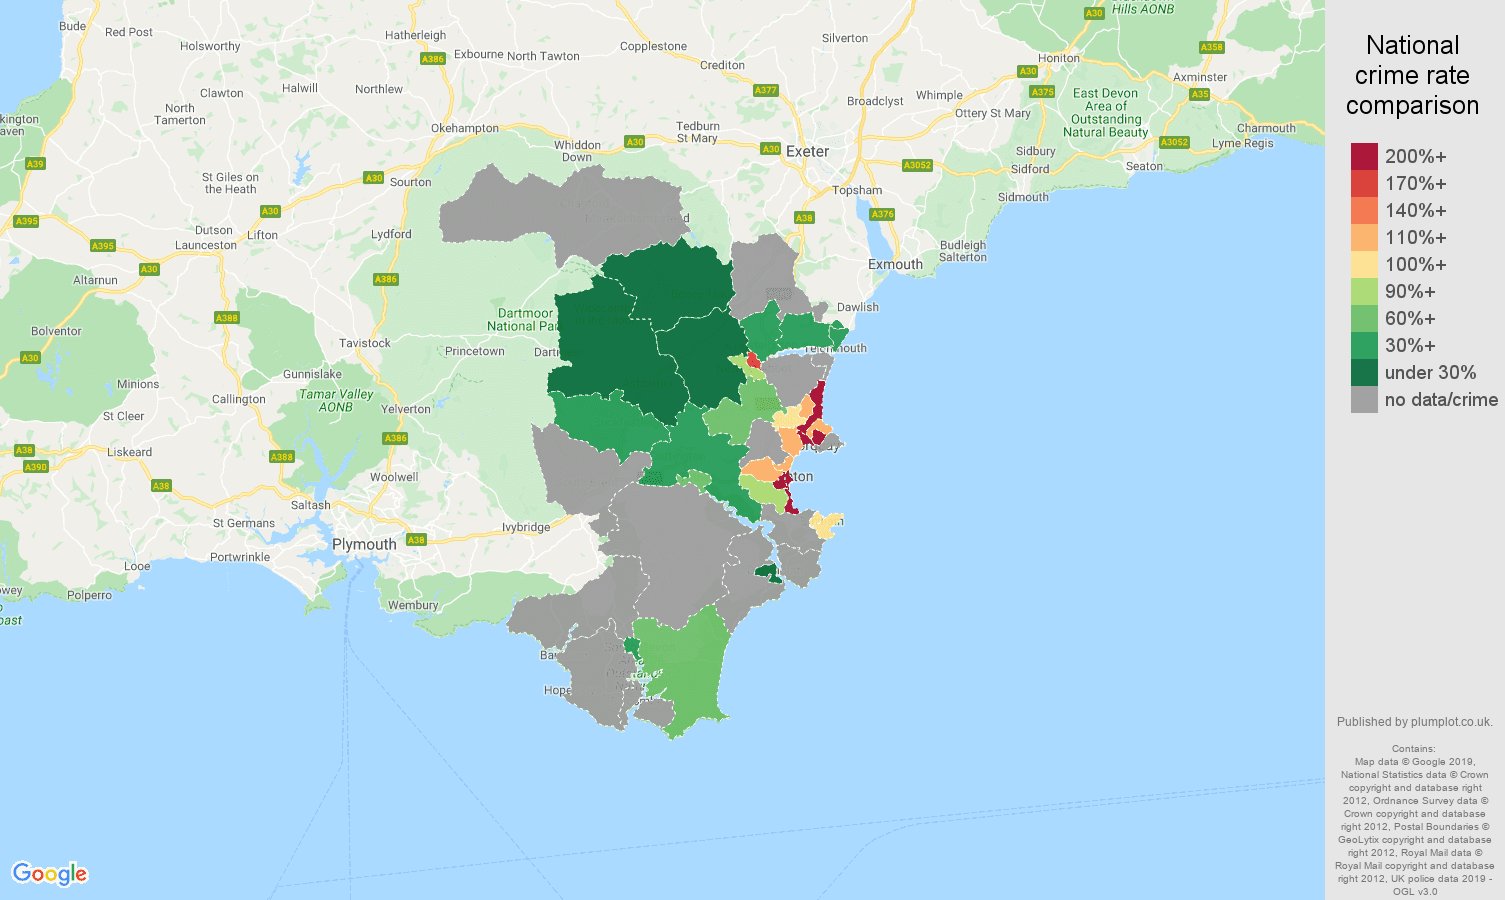 Torquay possession of weapons crime rate comparison map